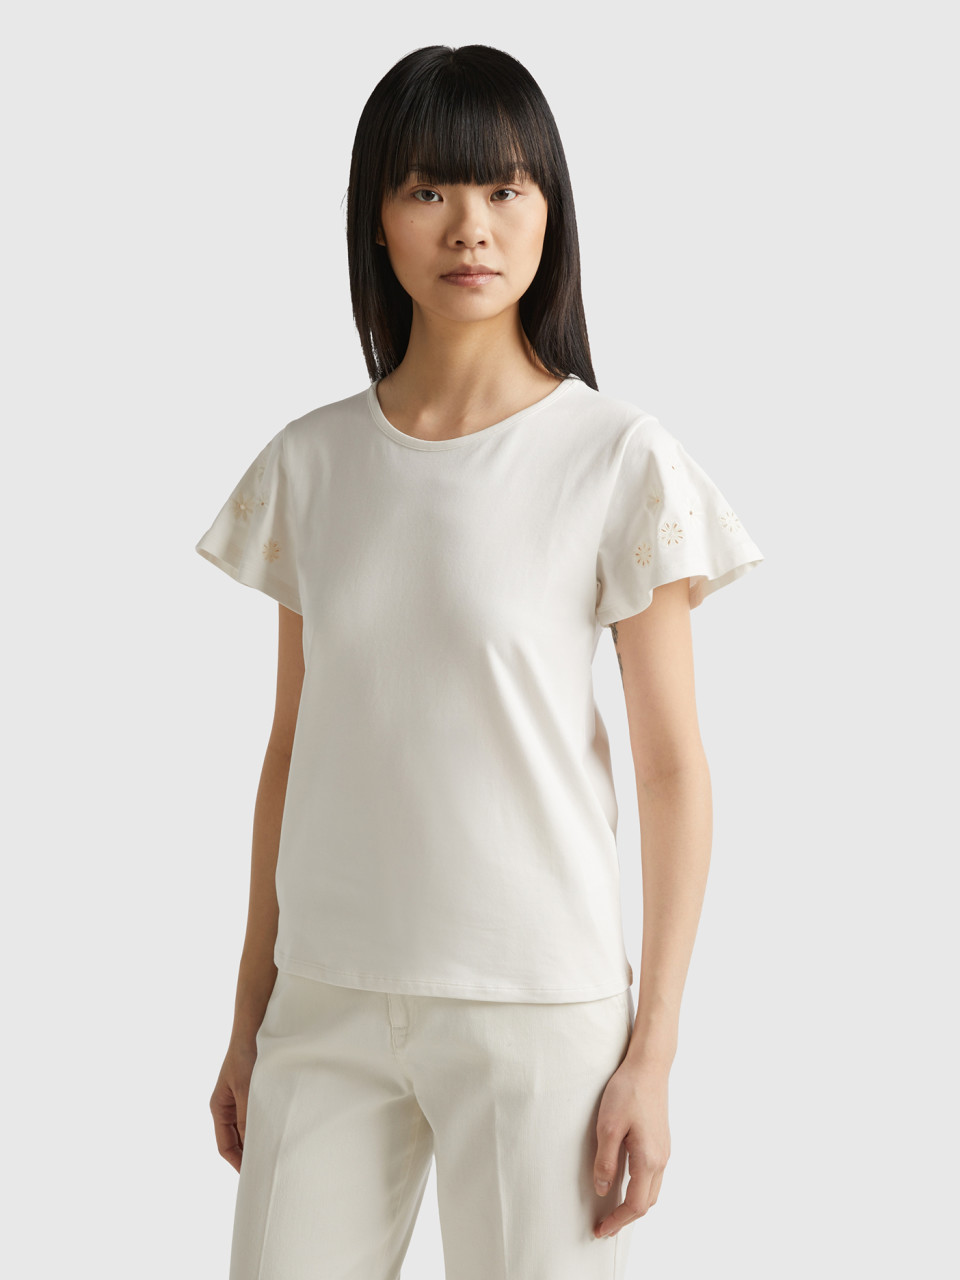 Benetton, T-shirt With Floral Embroidery, Creamy White, Women